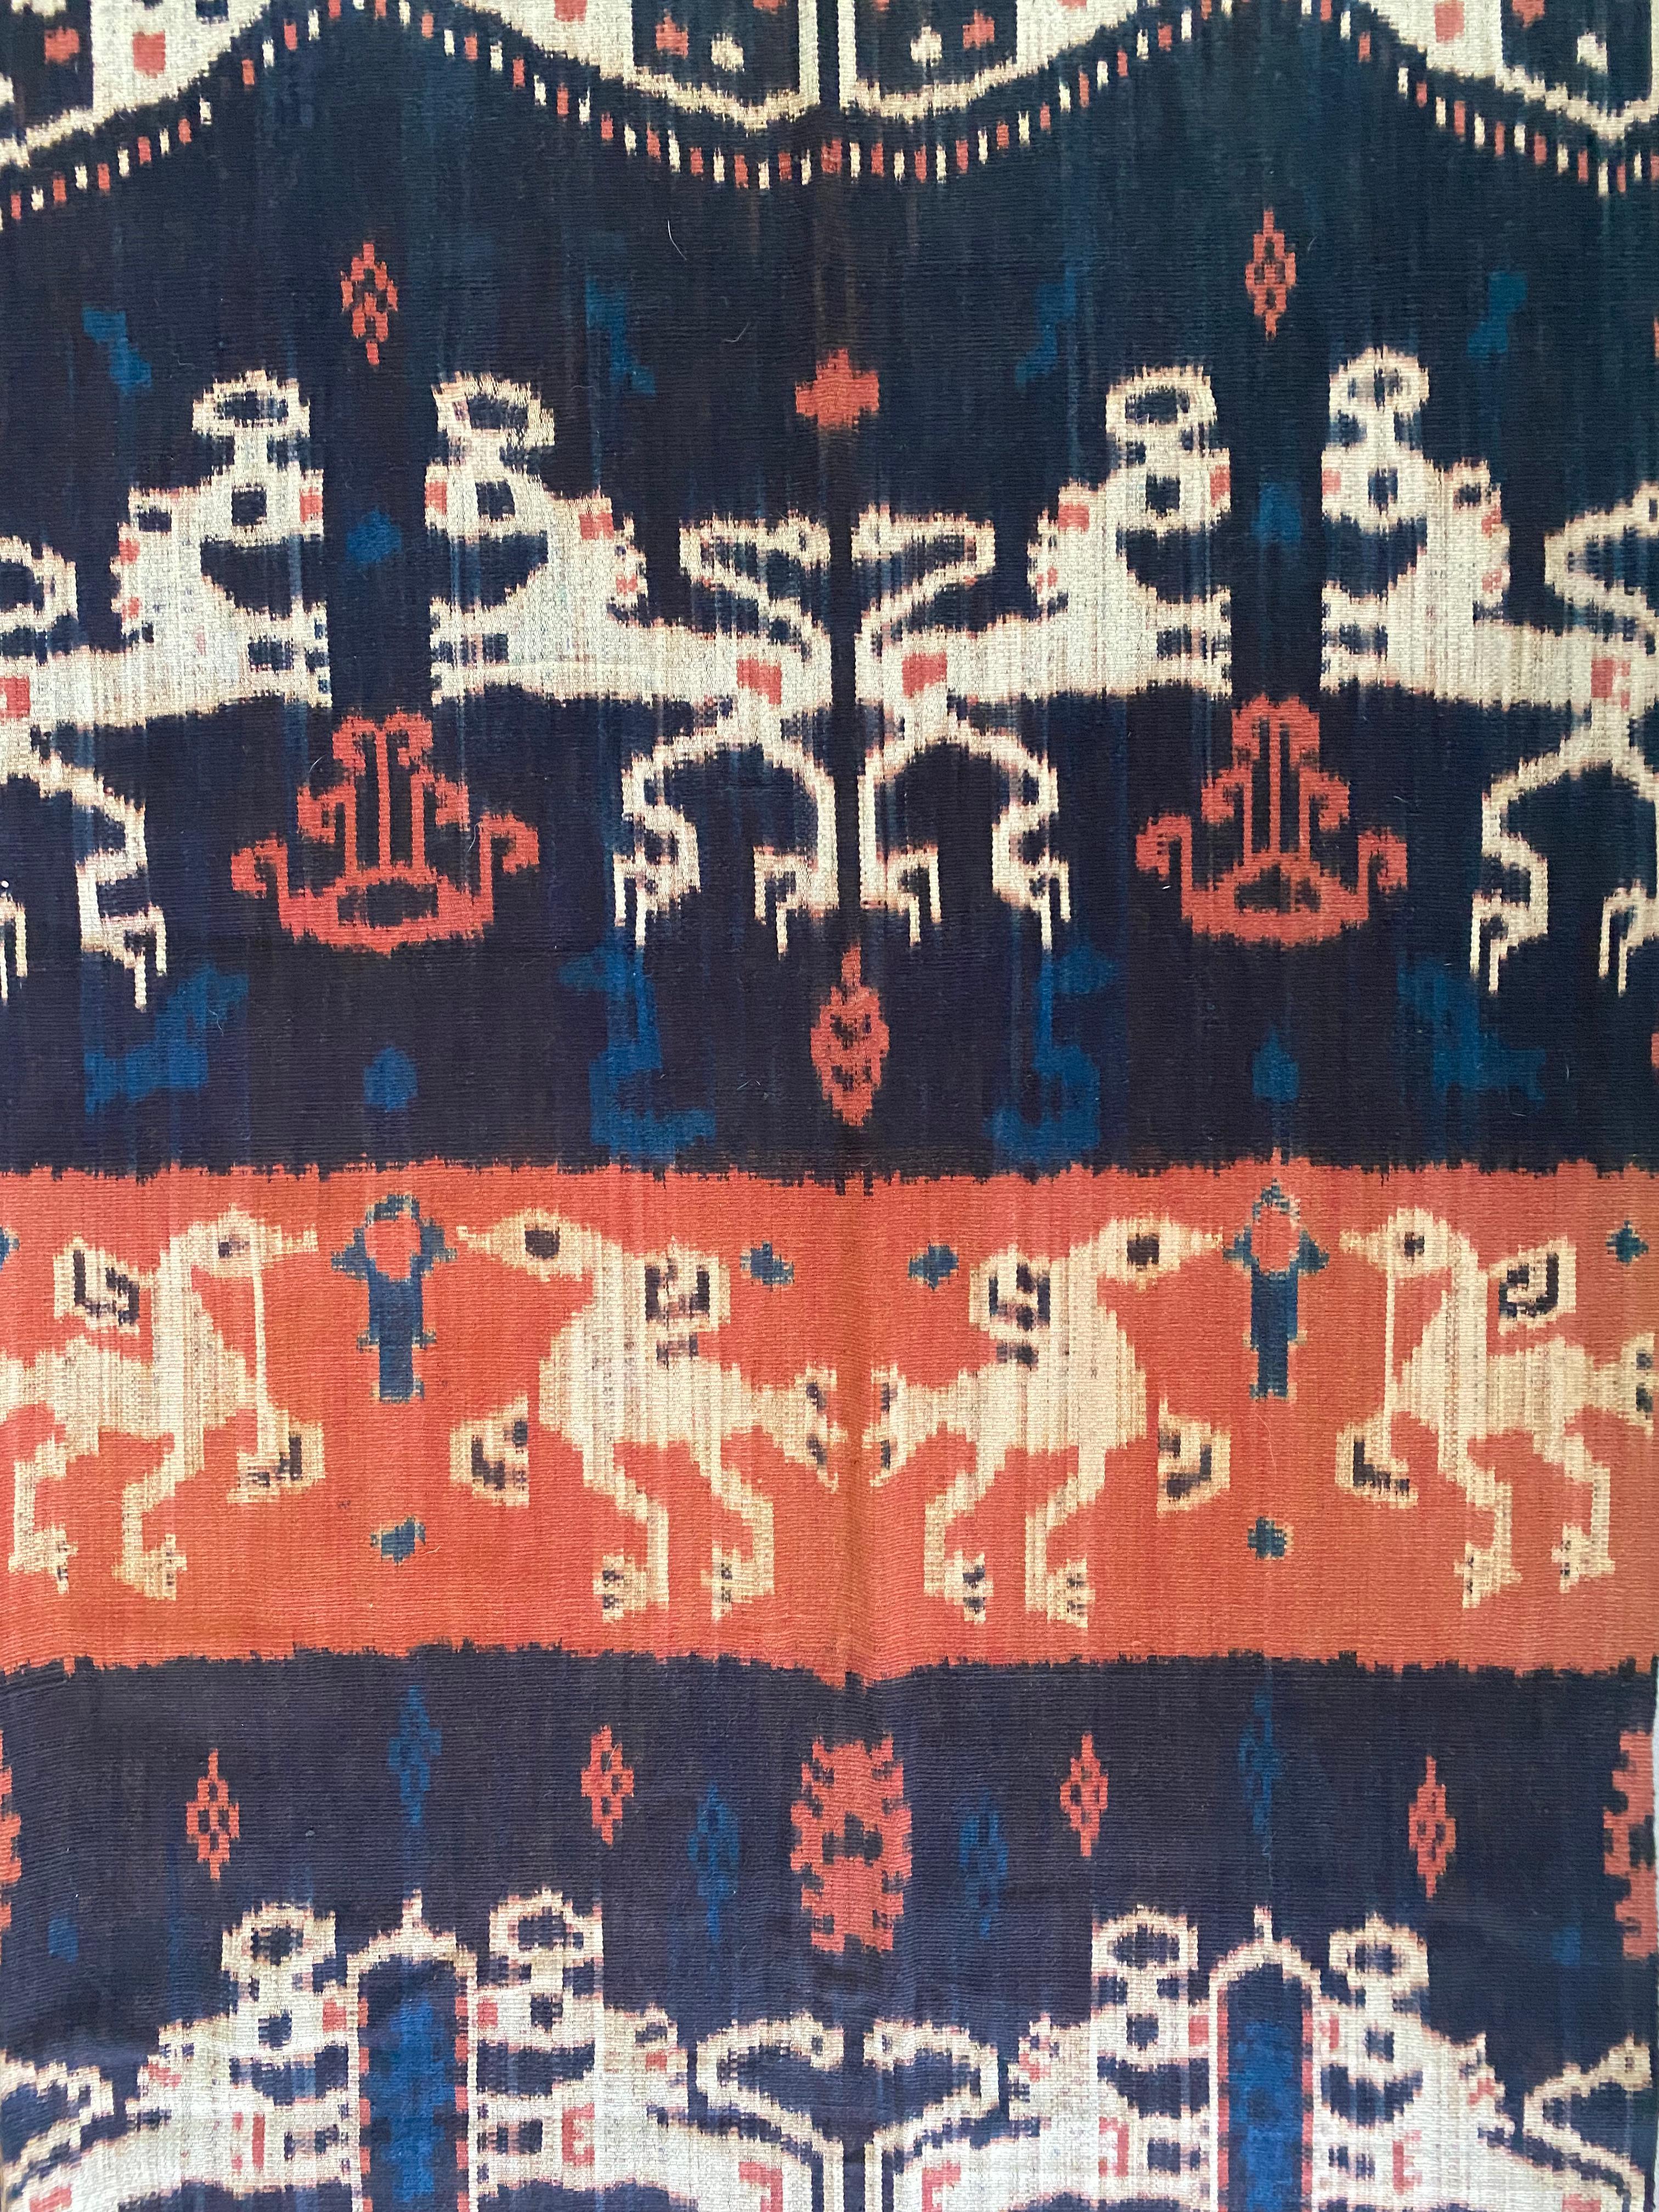 Yarn Ikat Textile from Sumba Island, Indonesia For Sale